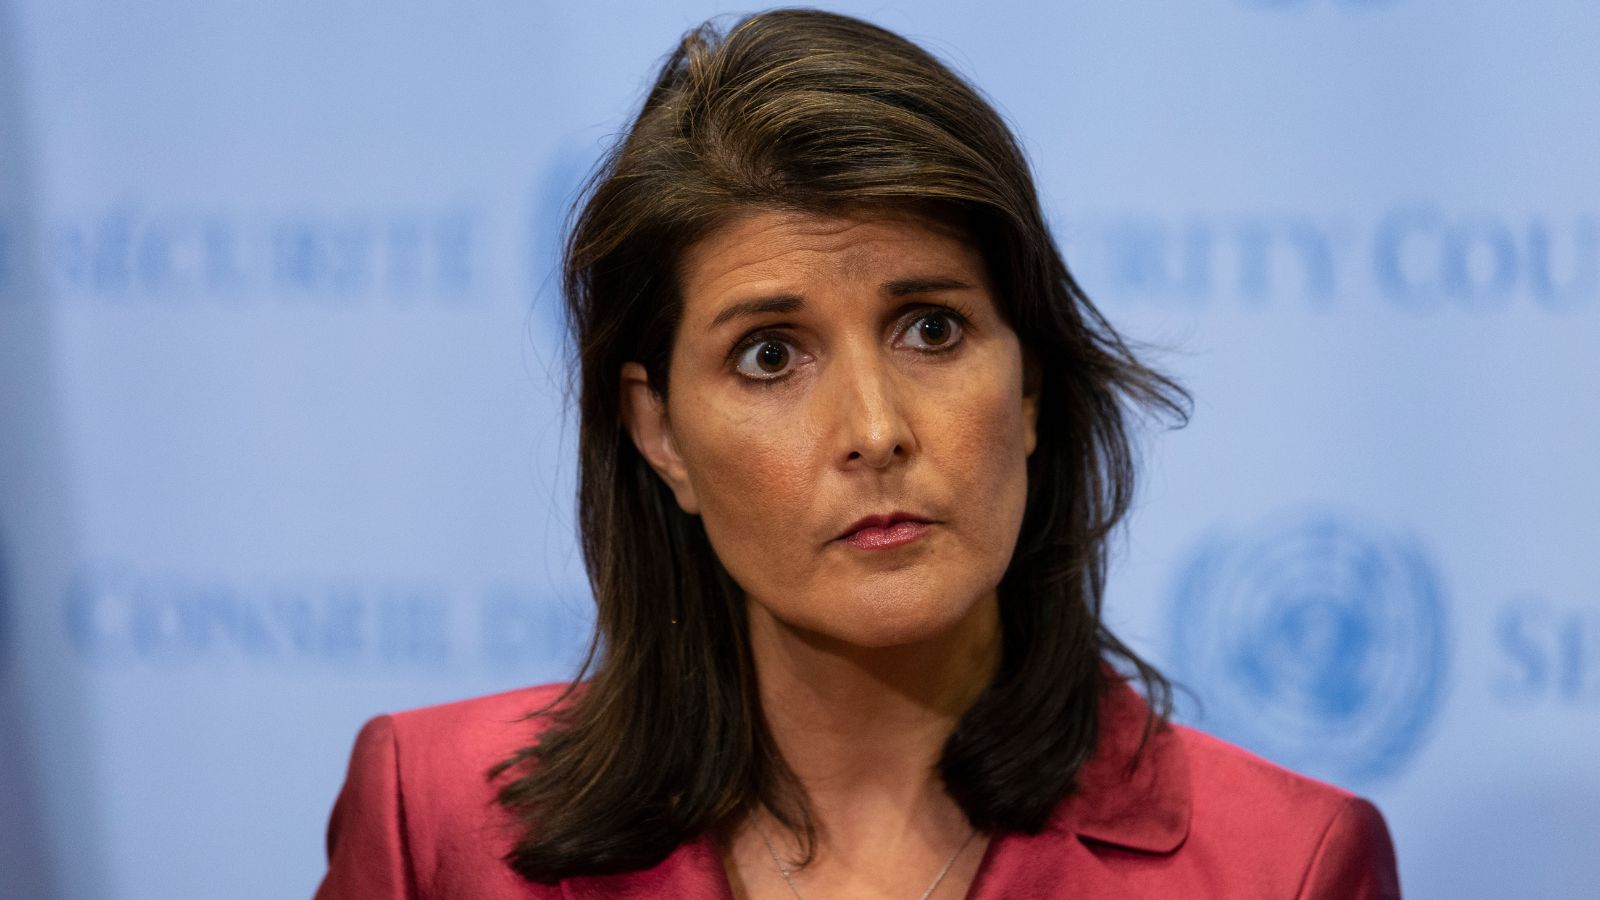 “No Different Than a Democrat” Nikki Haley’s Bold Proposal Targets Anonymous Iranian Accounts Spreading “Anti-American Filth”